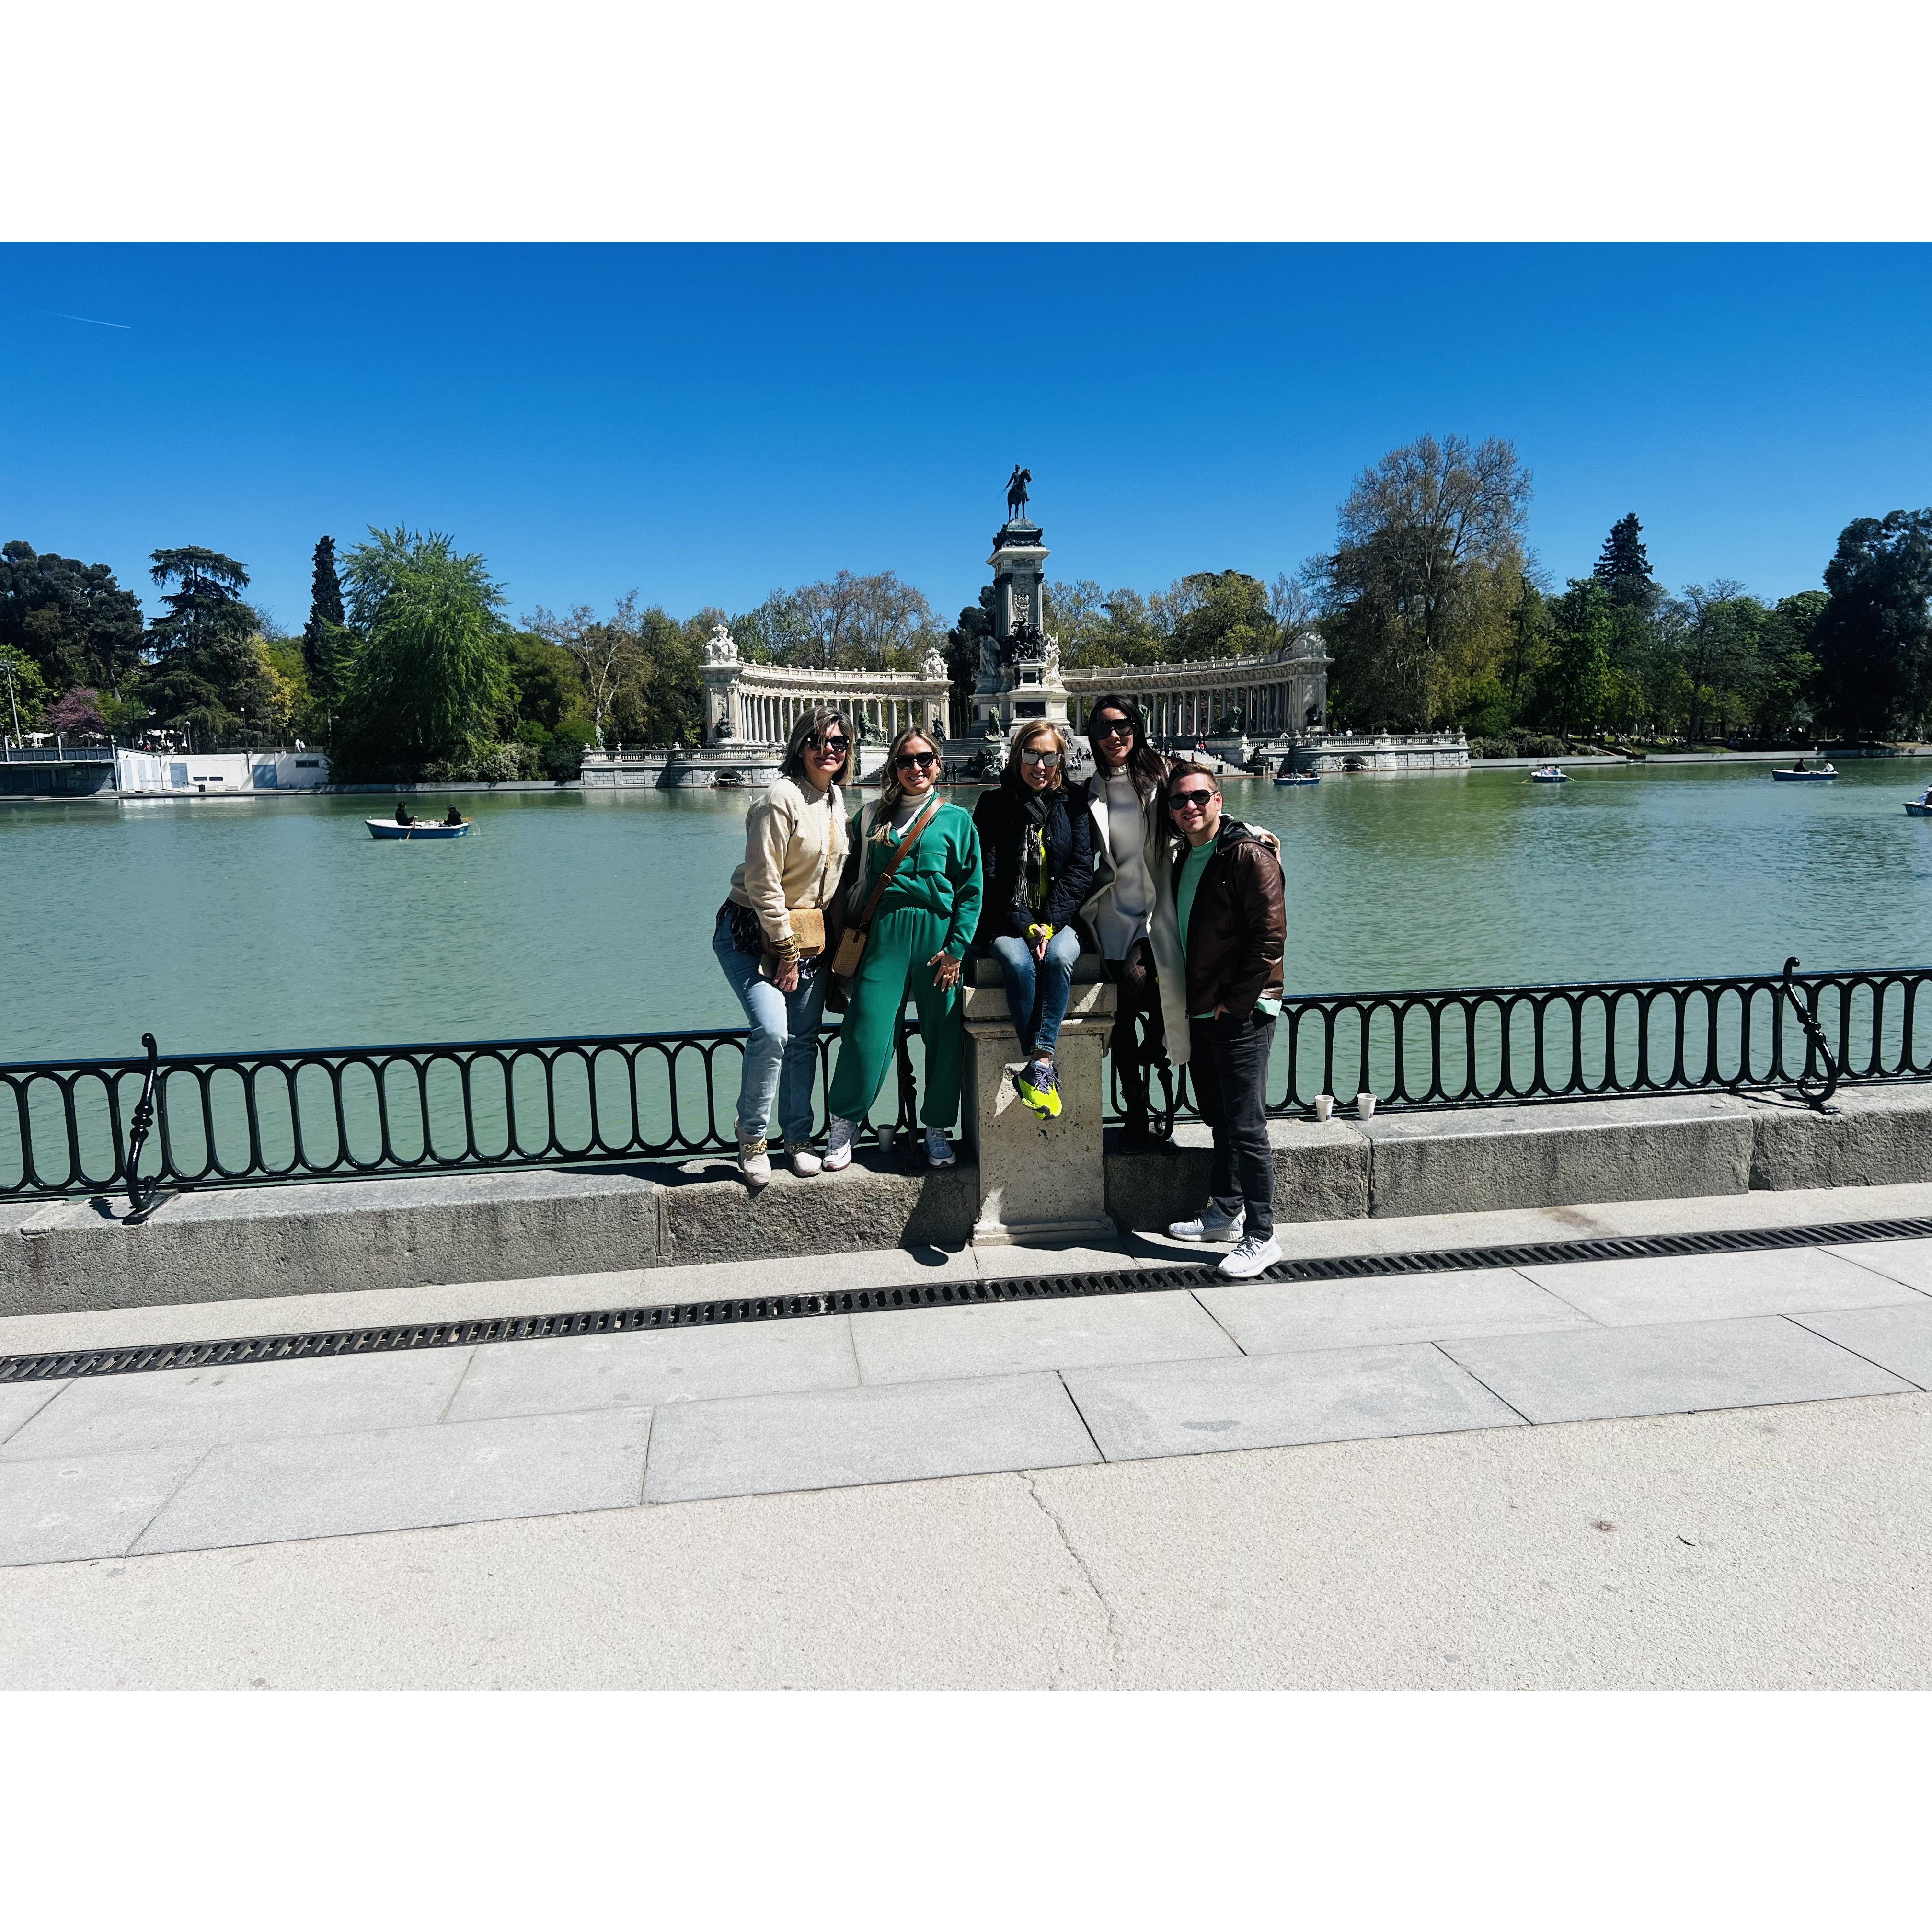 Our first trip with Sergio's Parents – Madrid Tio! #spain